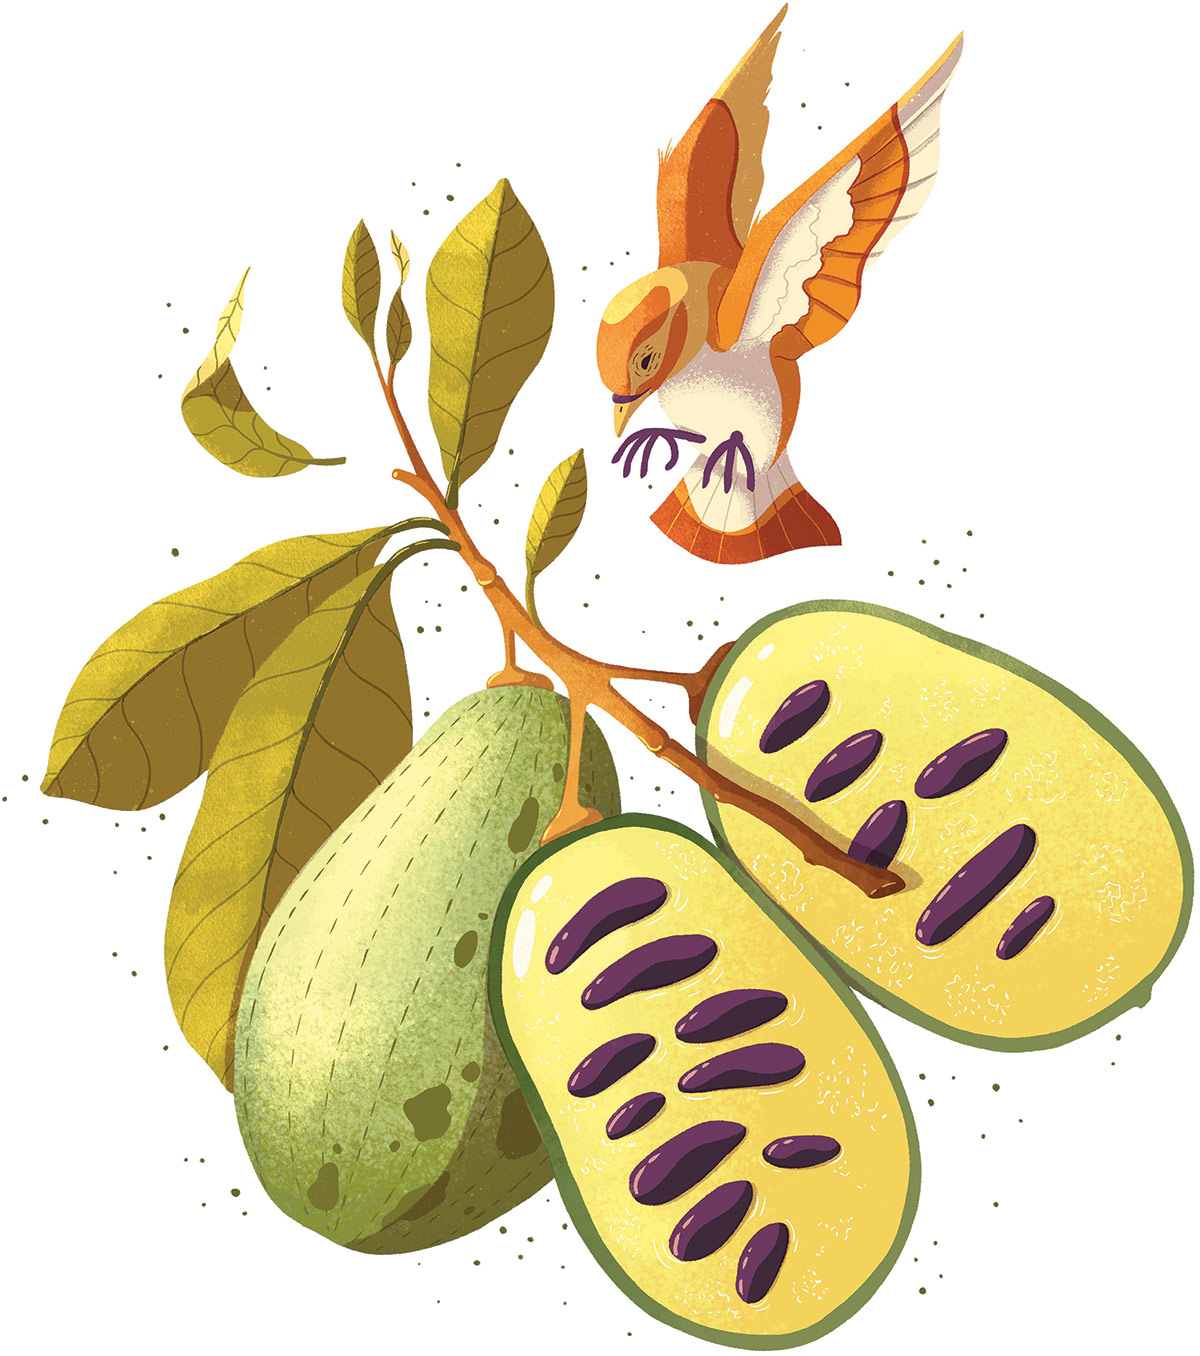 An illustrated cross-section of the pawpaw fruit, which are large and oval-shaped. Here they appear with green skin, yellow insides, and purple seeds. An orange bird prepares to land on the branch. 